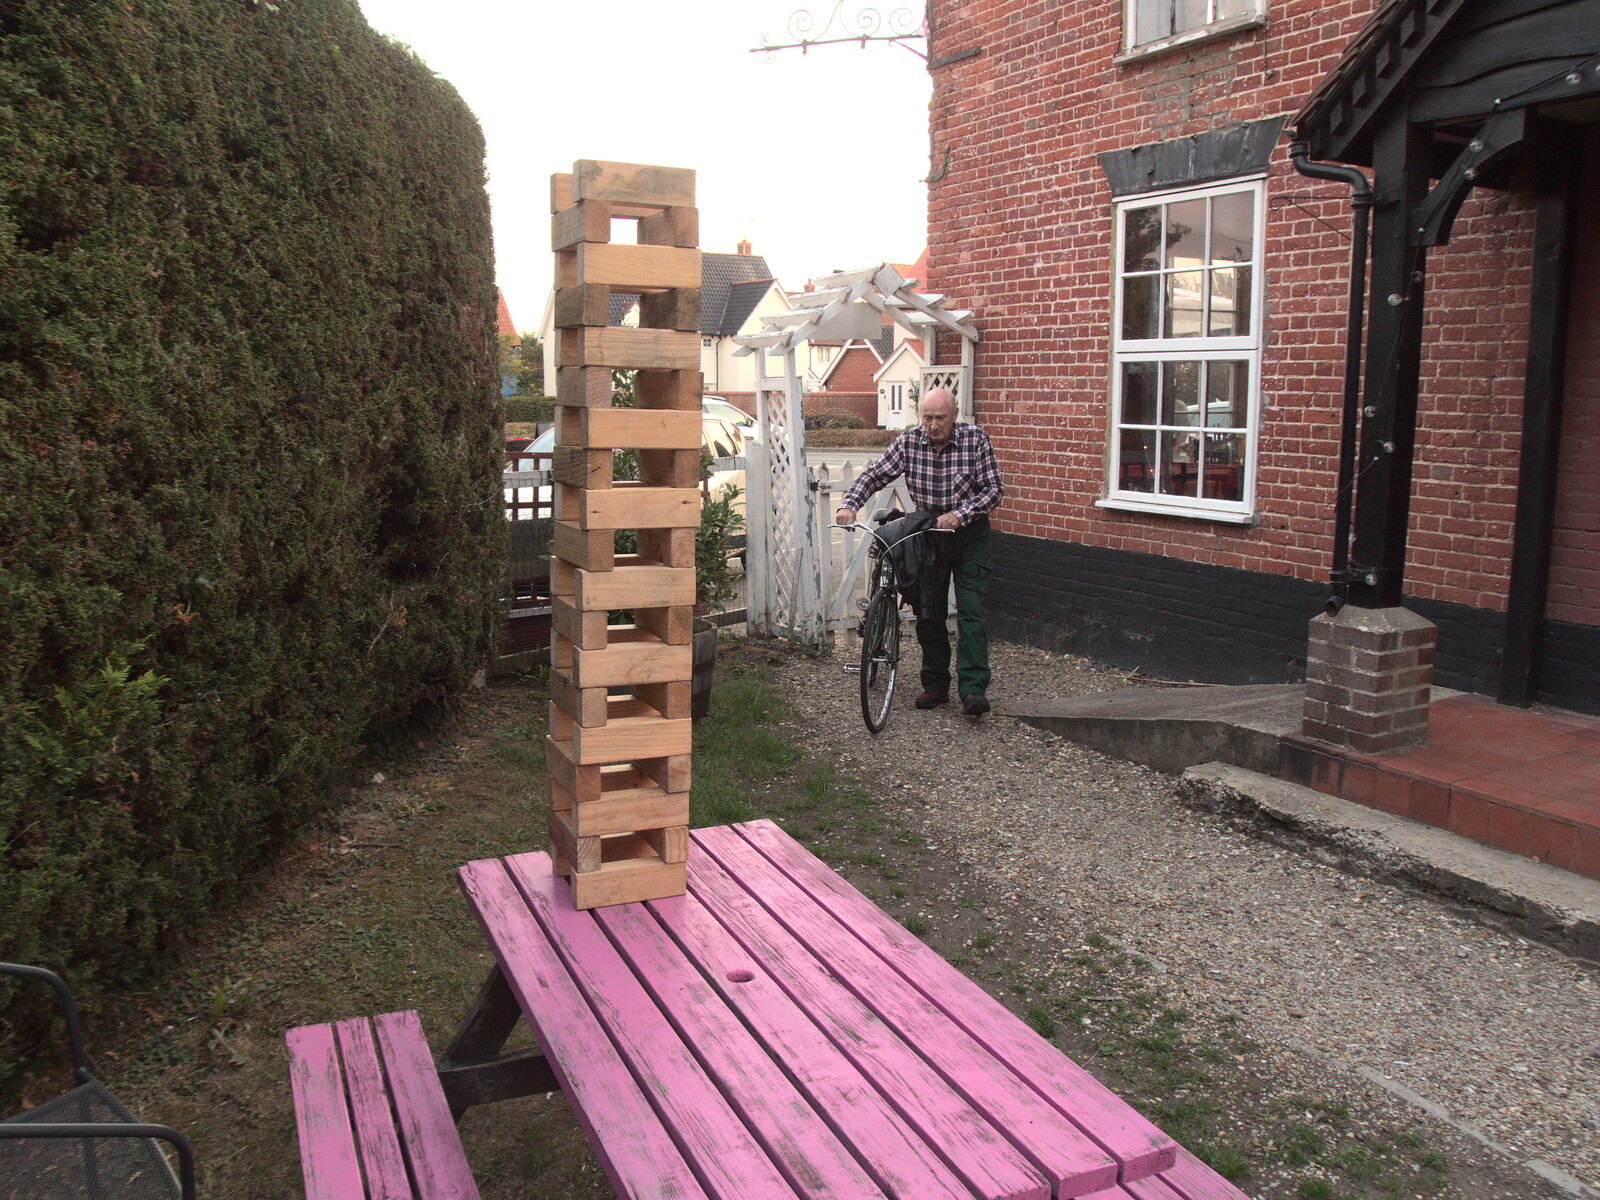 A Heritage Open Day, Eye, Suffolk - 18th September 2022: There's an oversized Jenga stack on a table